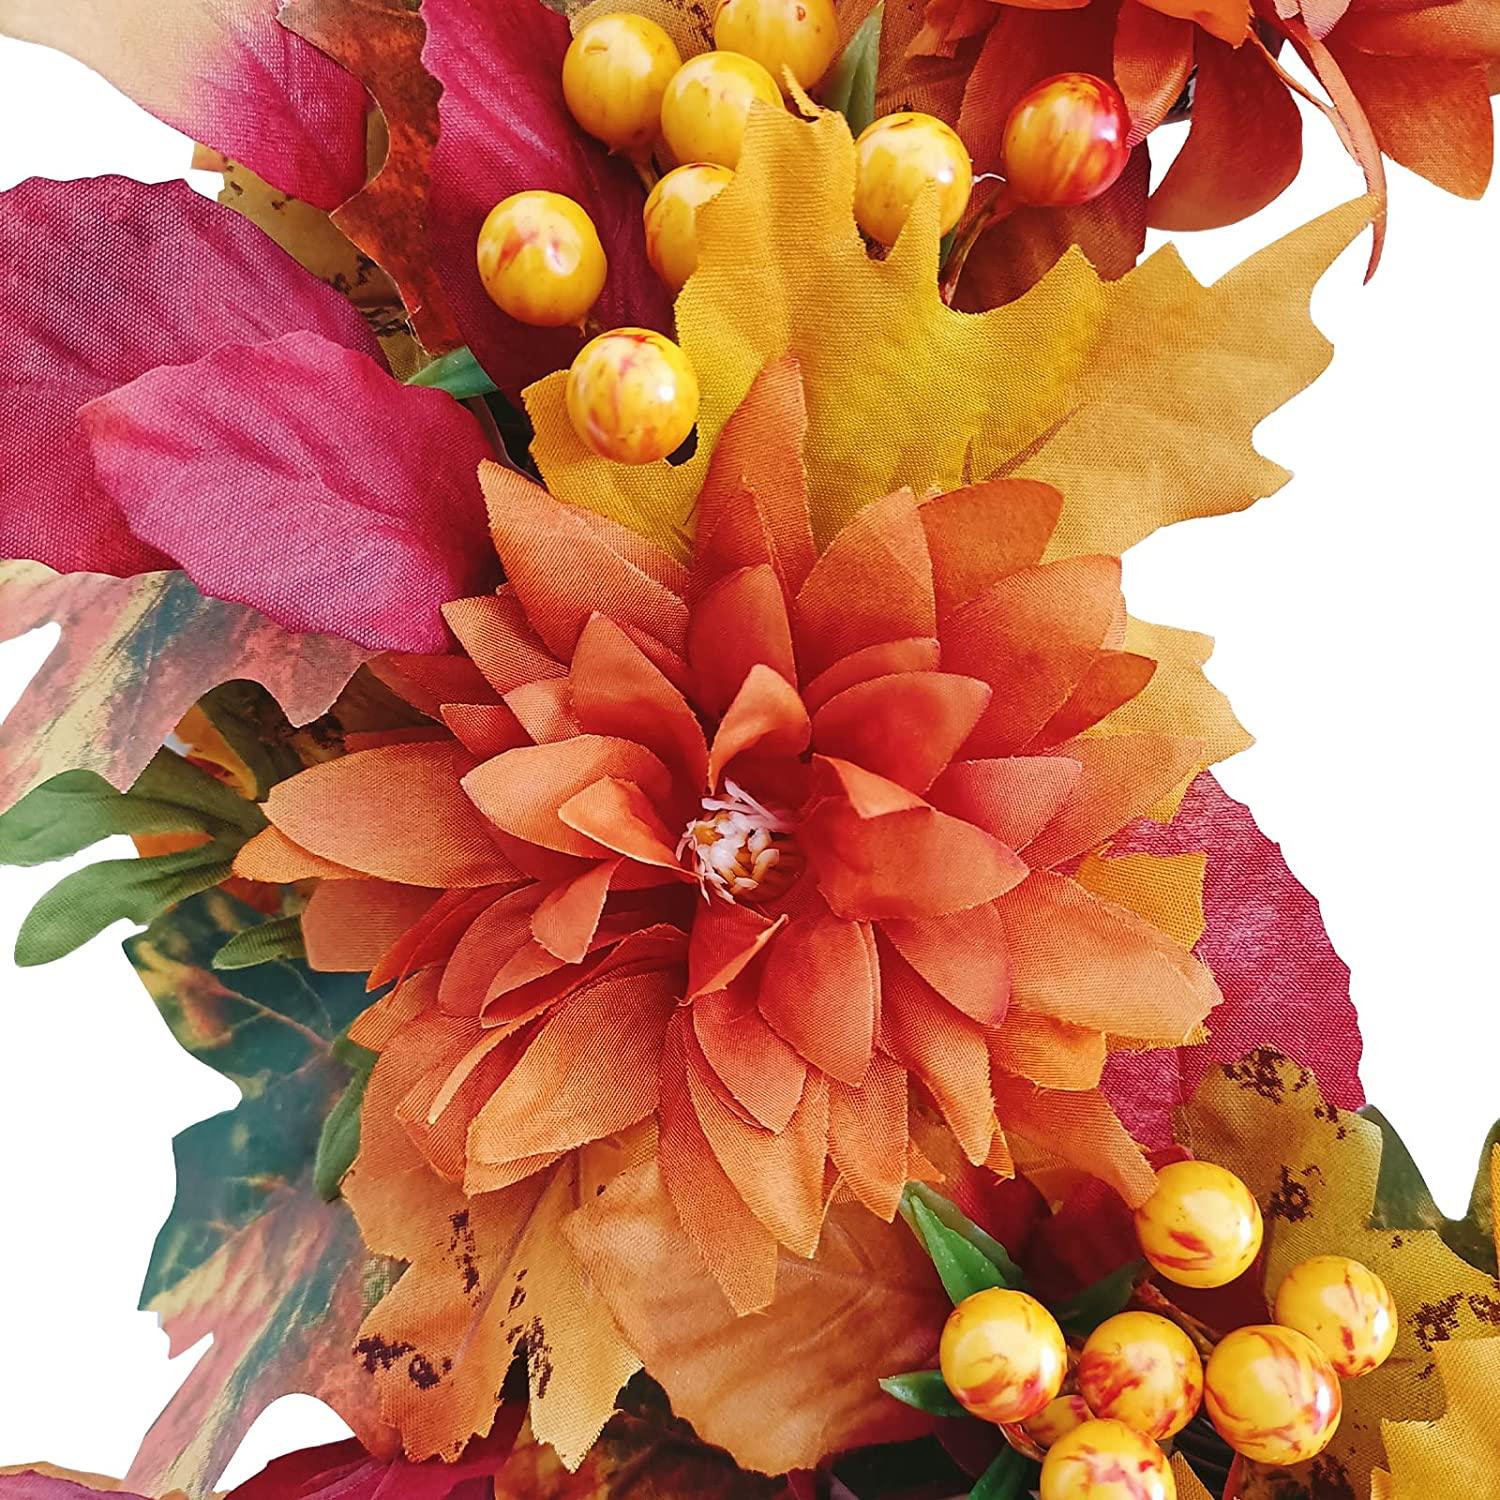 Fall Wreath for Front Door, 20-Inch Autumn Sunflowers Wreath - Tokcare Home